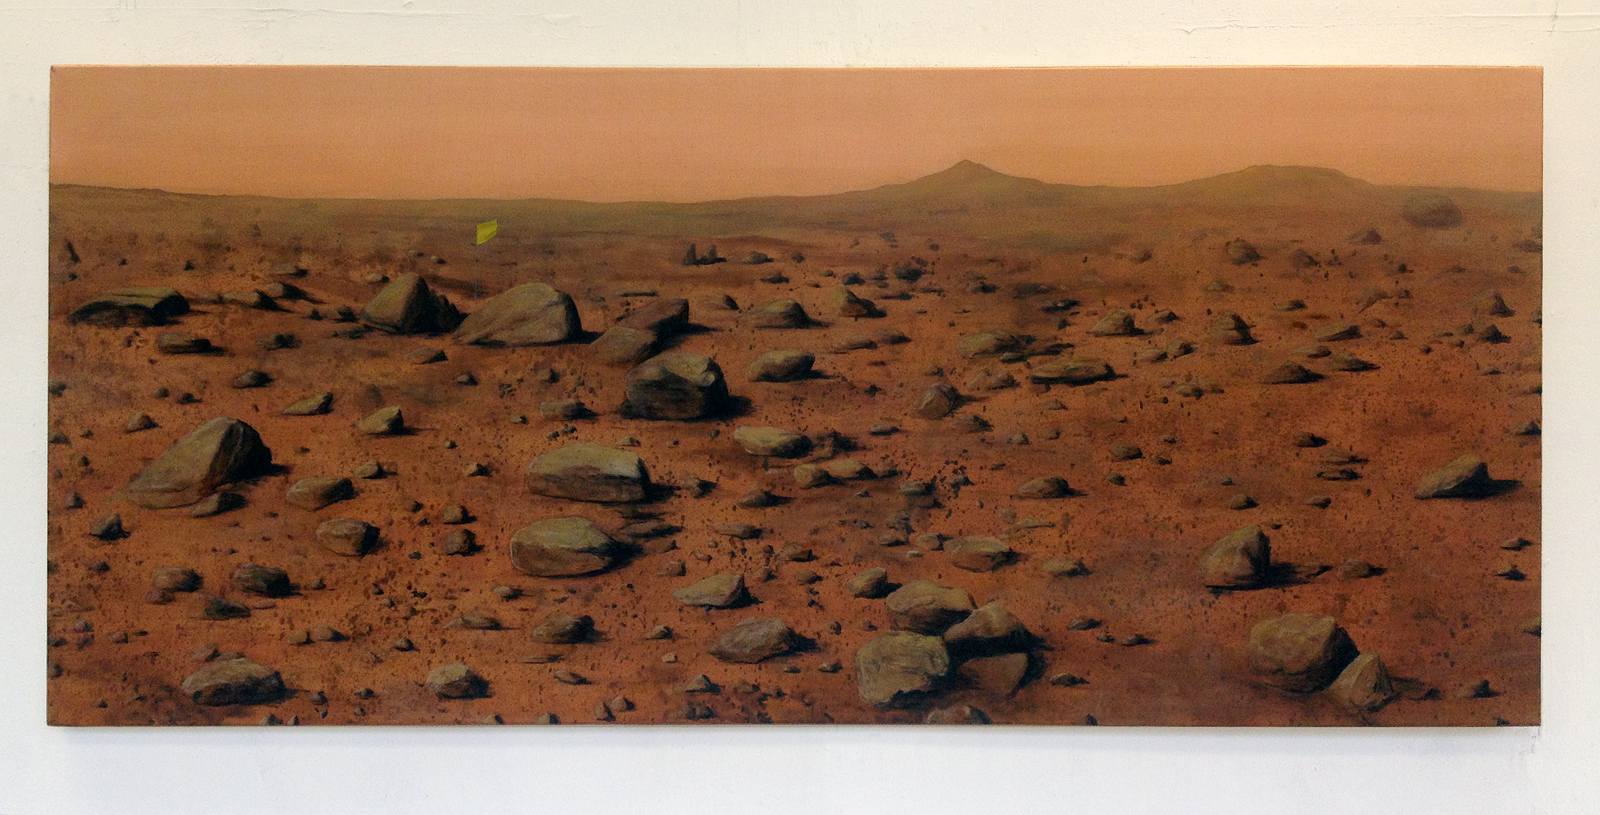   Conquest (Mars),  2012 Oil on canvas 32 x 72 inches 